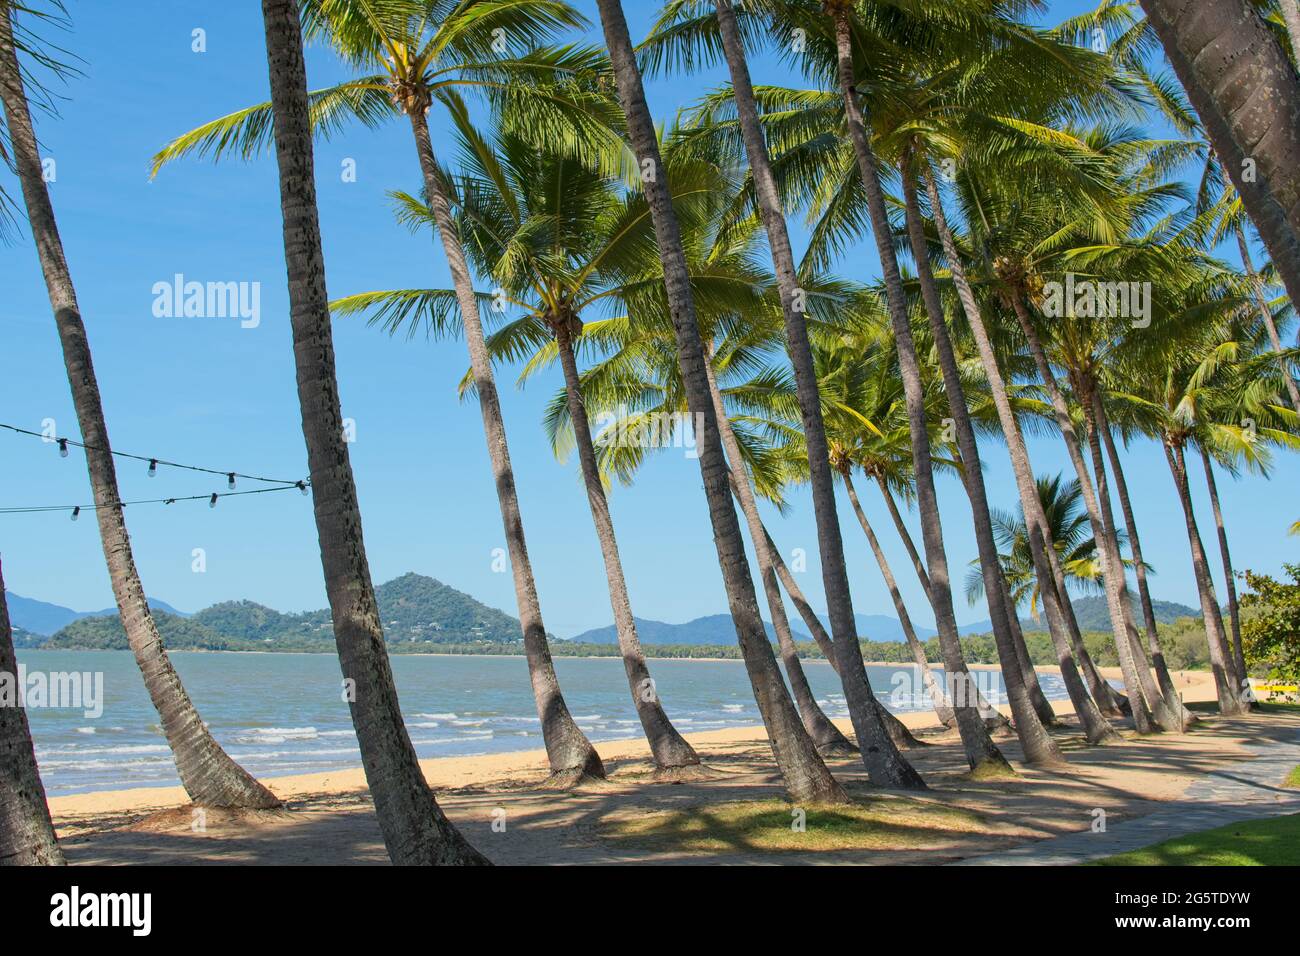 Palm trees on tropical beach in Palm Cove North Queensland Stock Photo